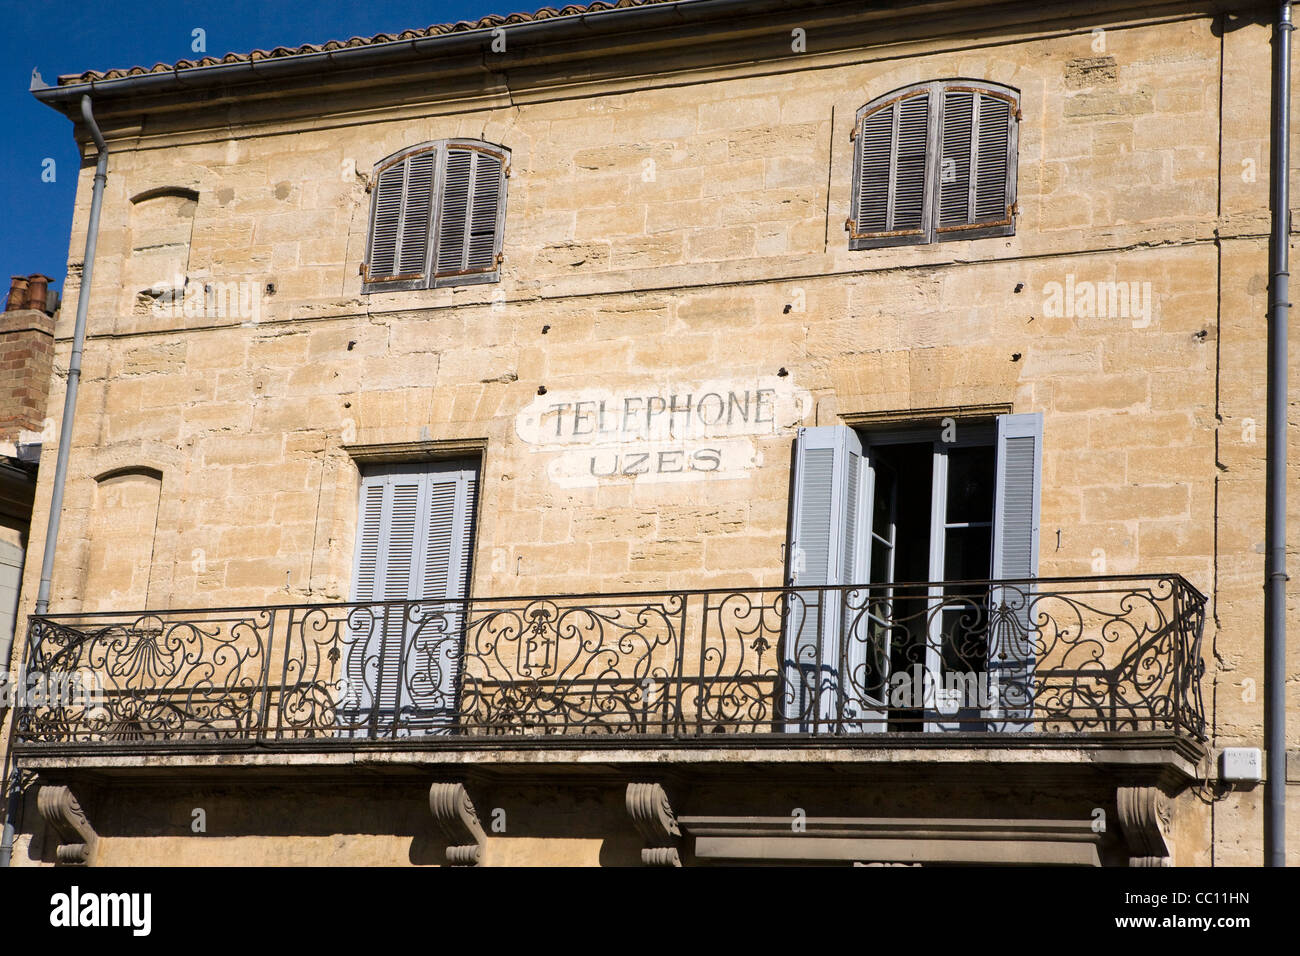 The old telephone exchange in Uzes, France Stock Photo